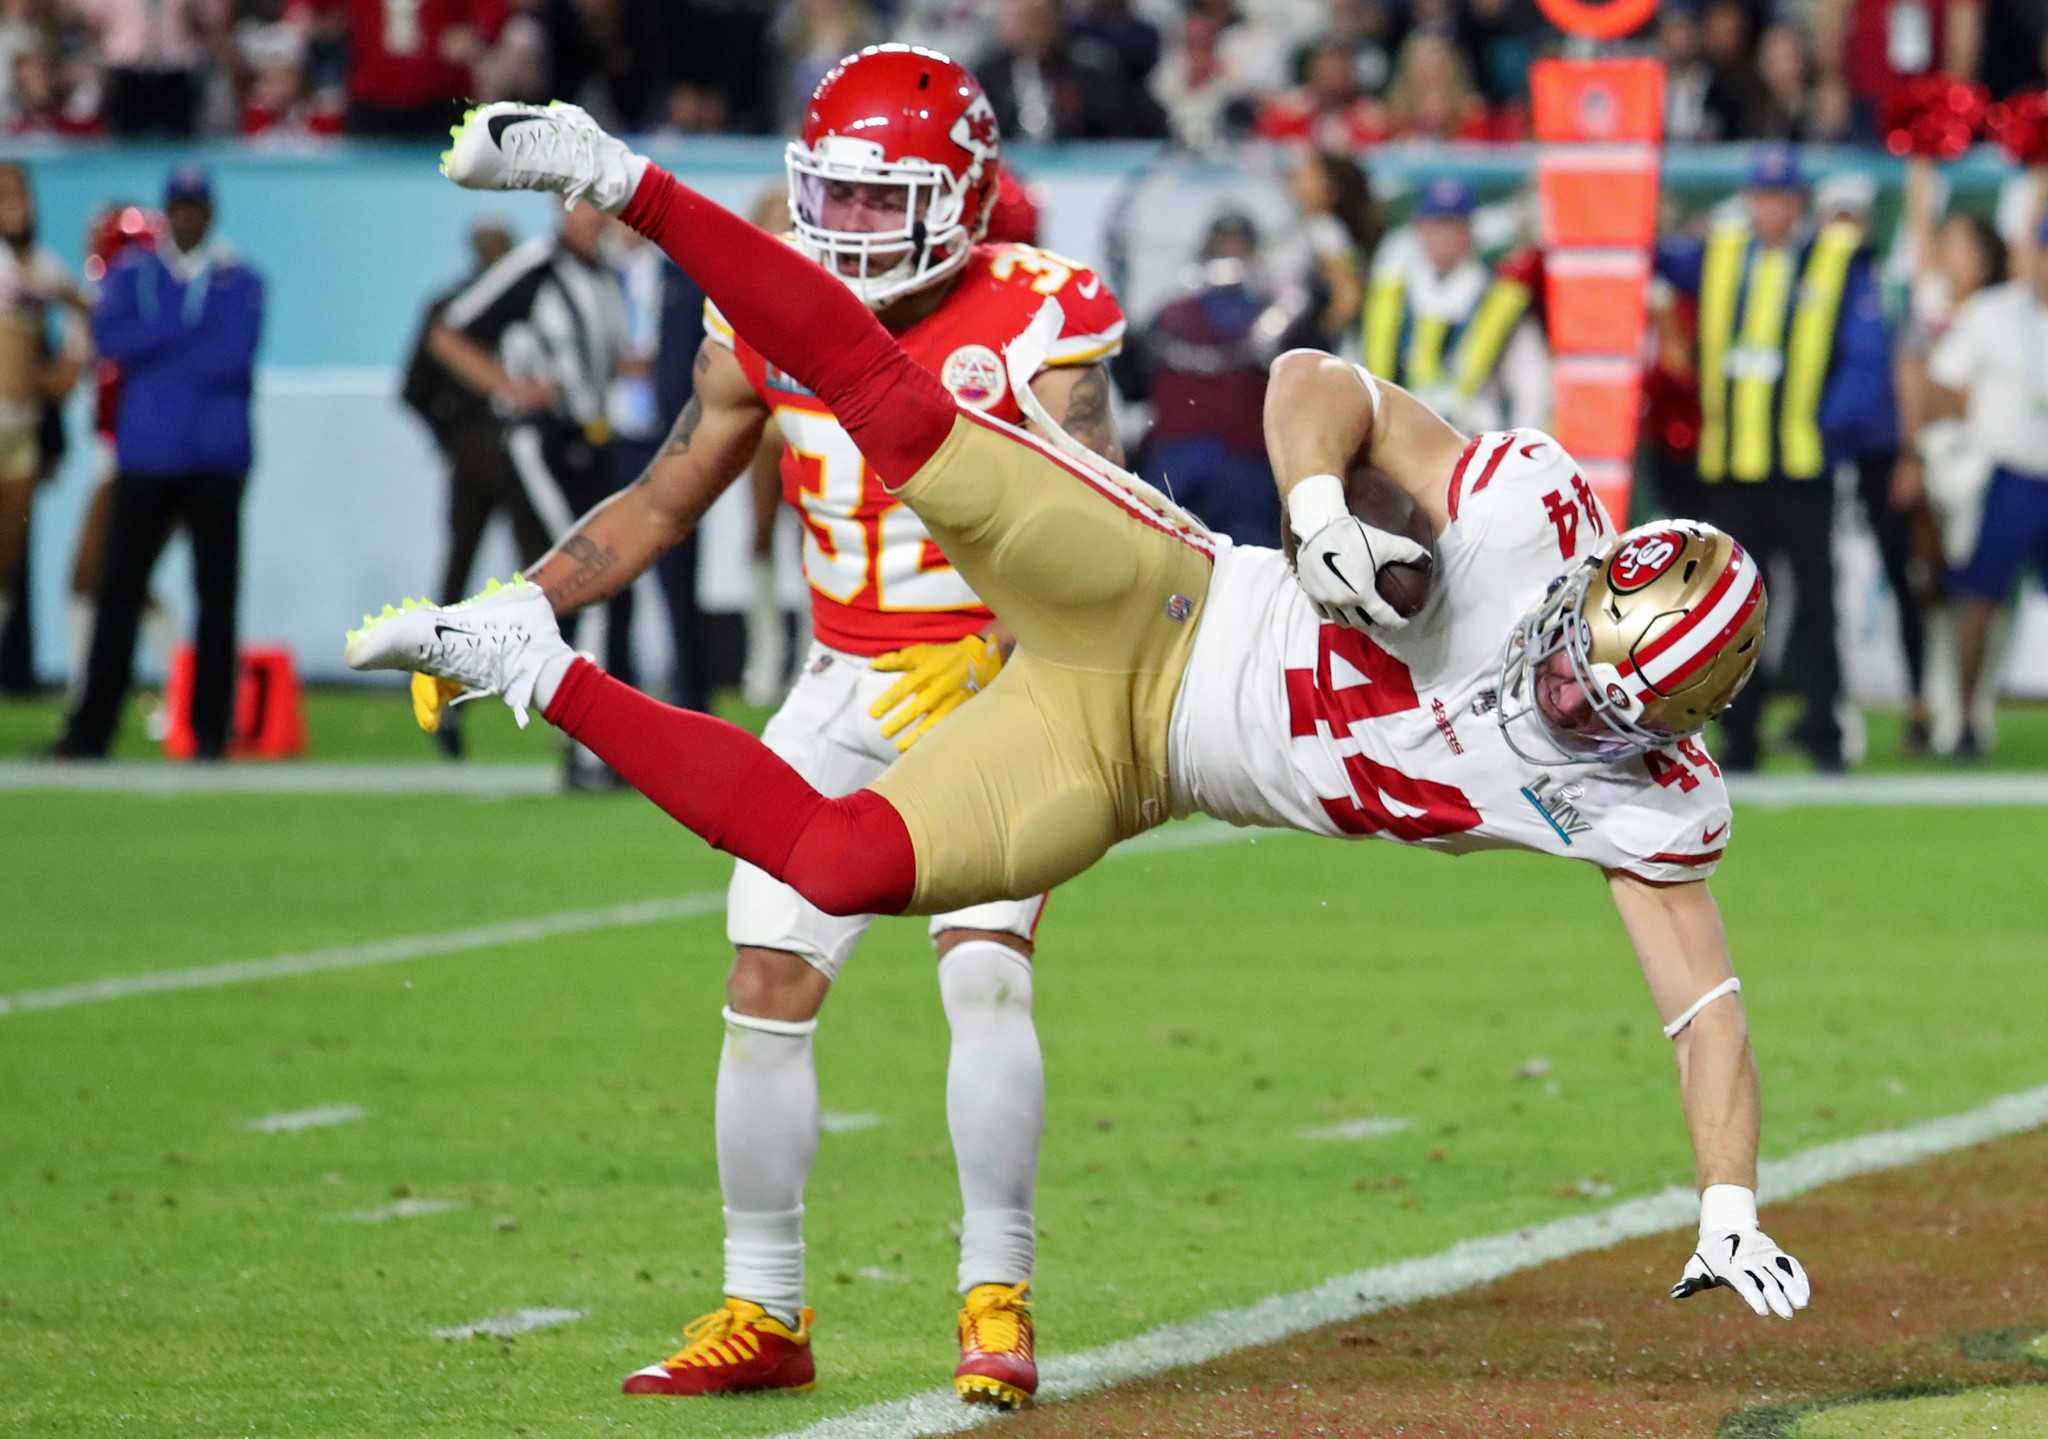 Fullback Kyle Juszczyk of the 49ers dives into the end zone for a touchdown against the Chiefs during the 2020 Super Bowl on Feb. 2, 2020.